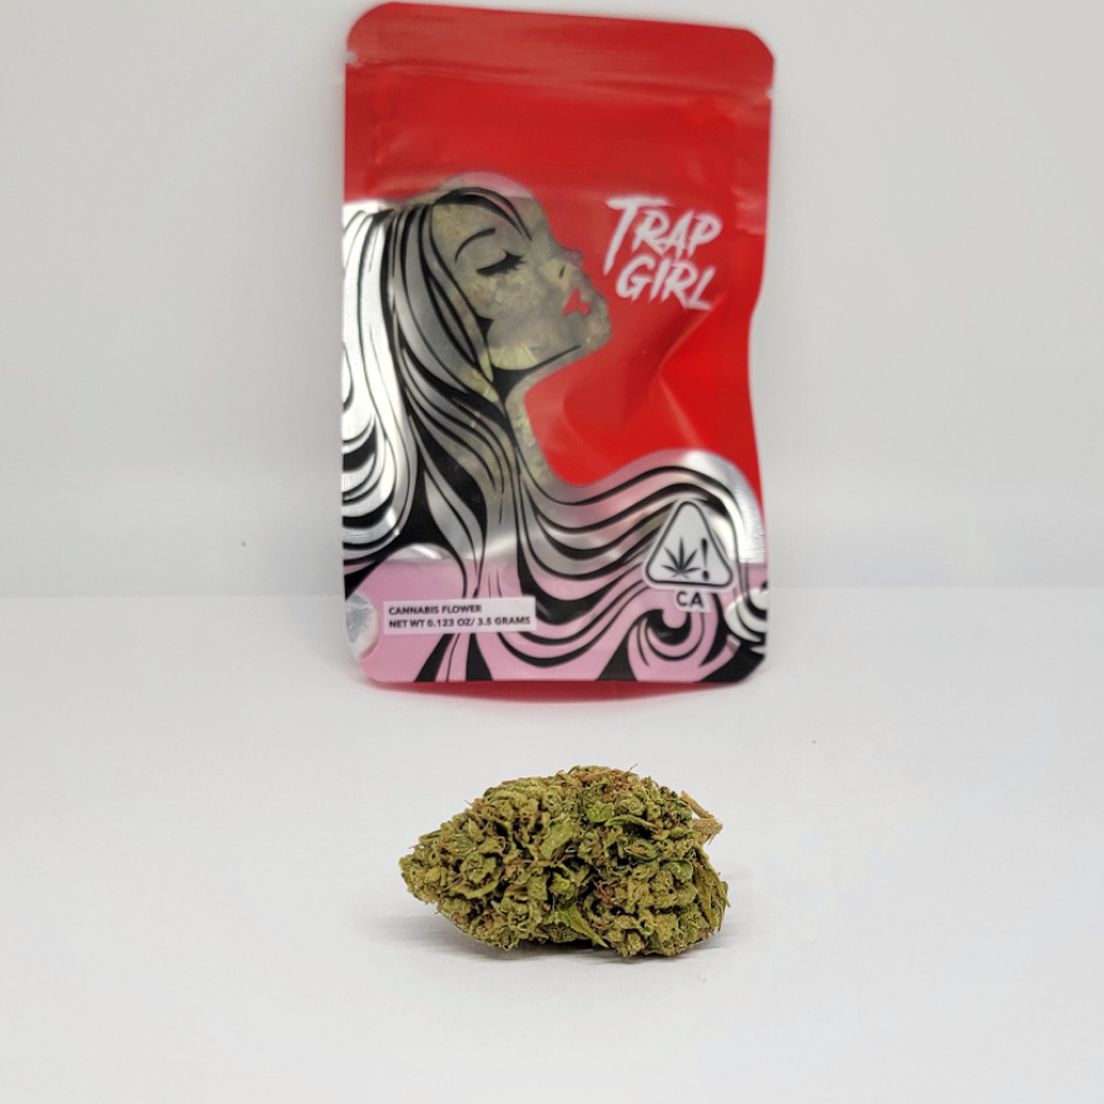 *BLOWOUT DEAL! $25 1/8 Stardust OG (30.2%/Indica) - Trap Girl